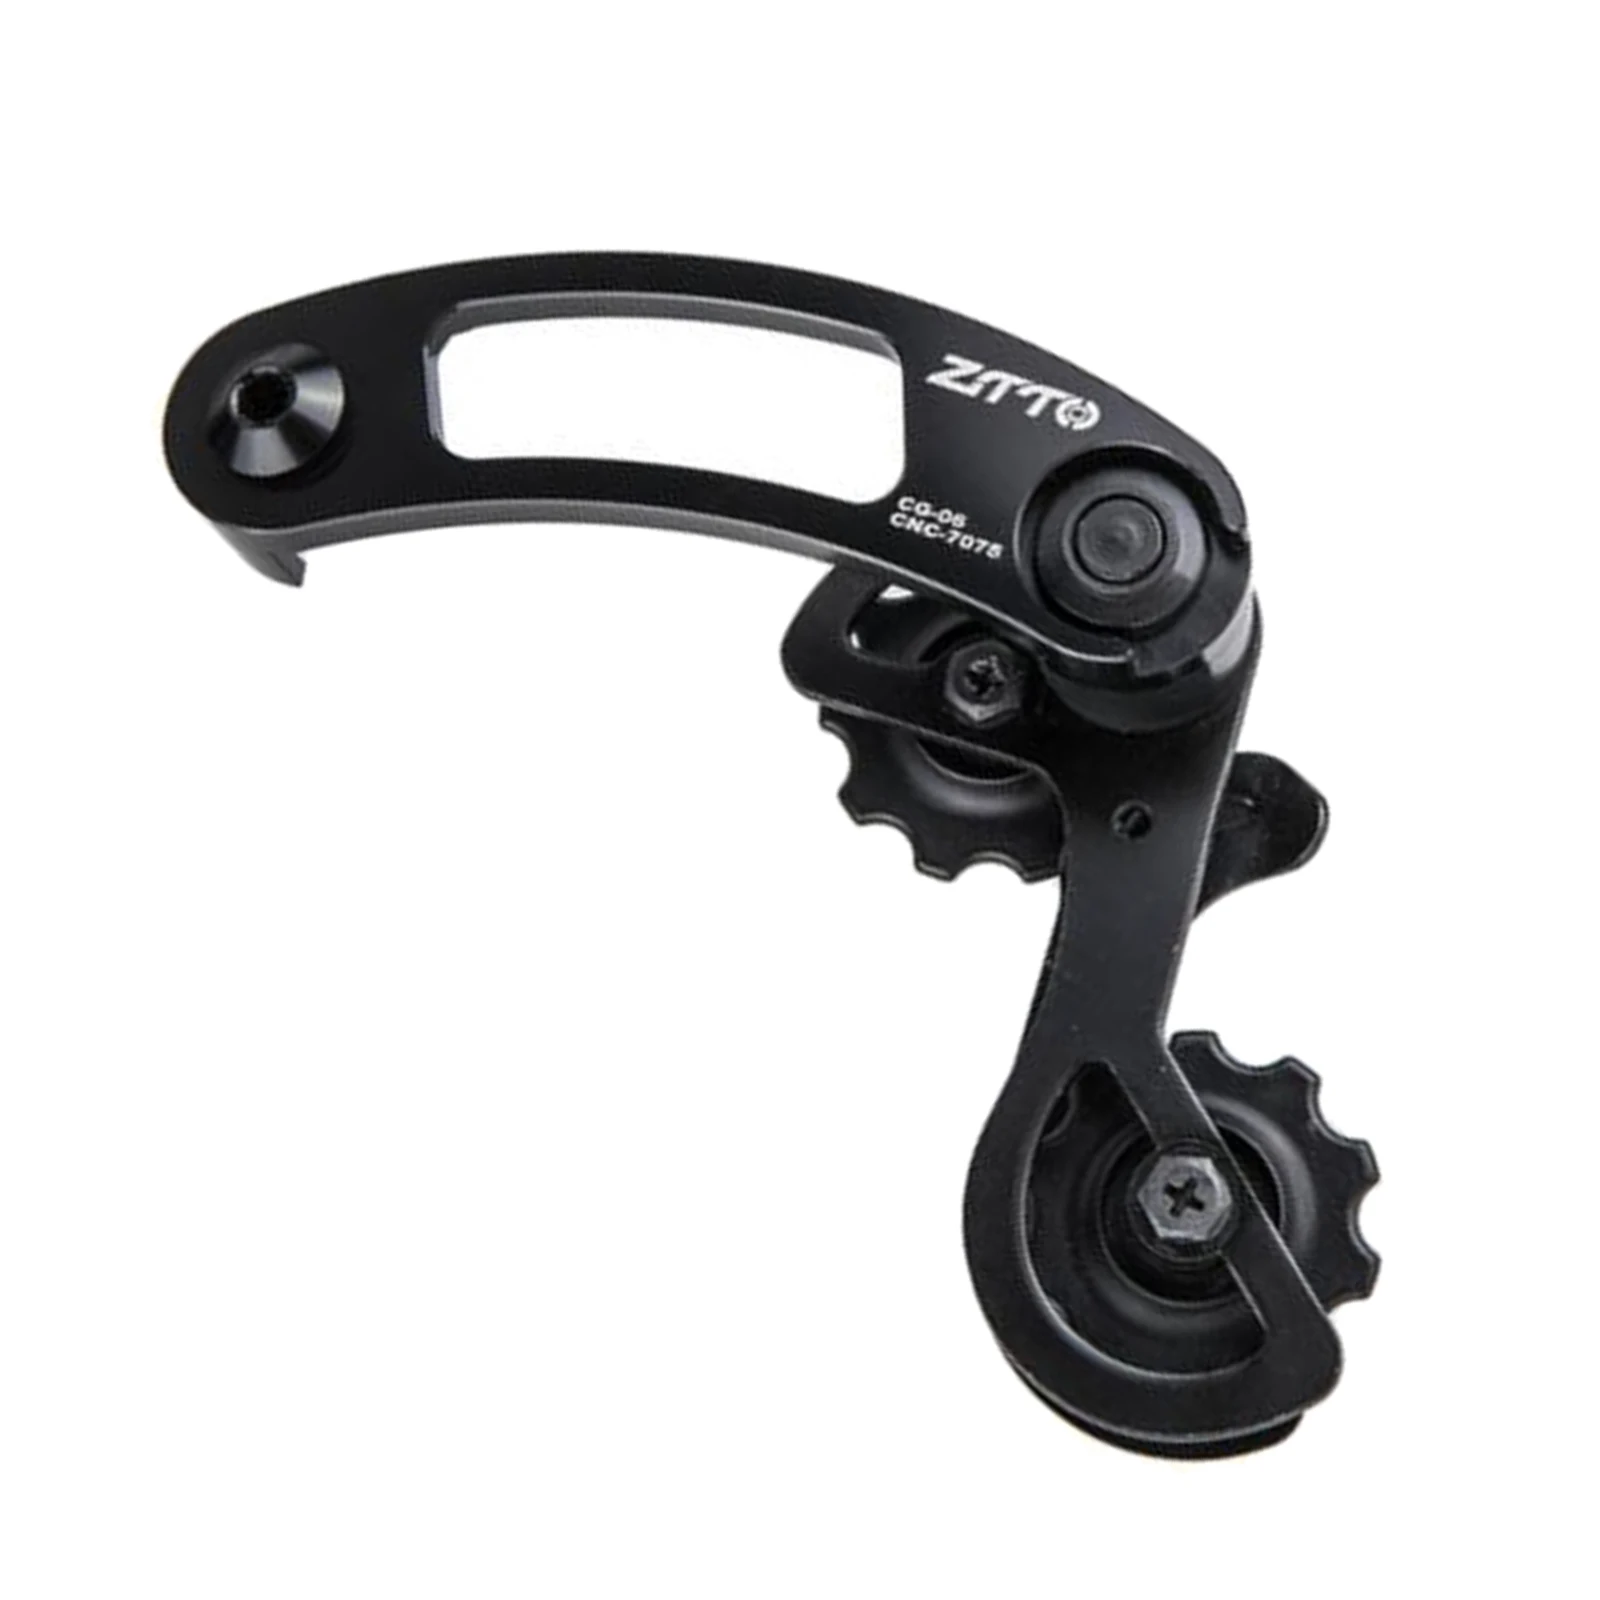 TZOU MTB Bicycle Single Speed Derailleur Bike Chain Tensioner Guide Single Speed Bicycle Parts CG-06 Chain Tensioner 